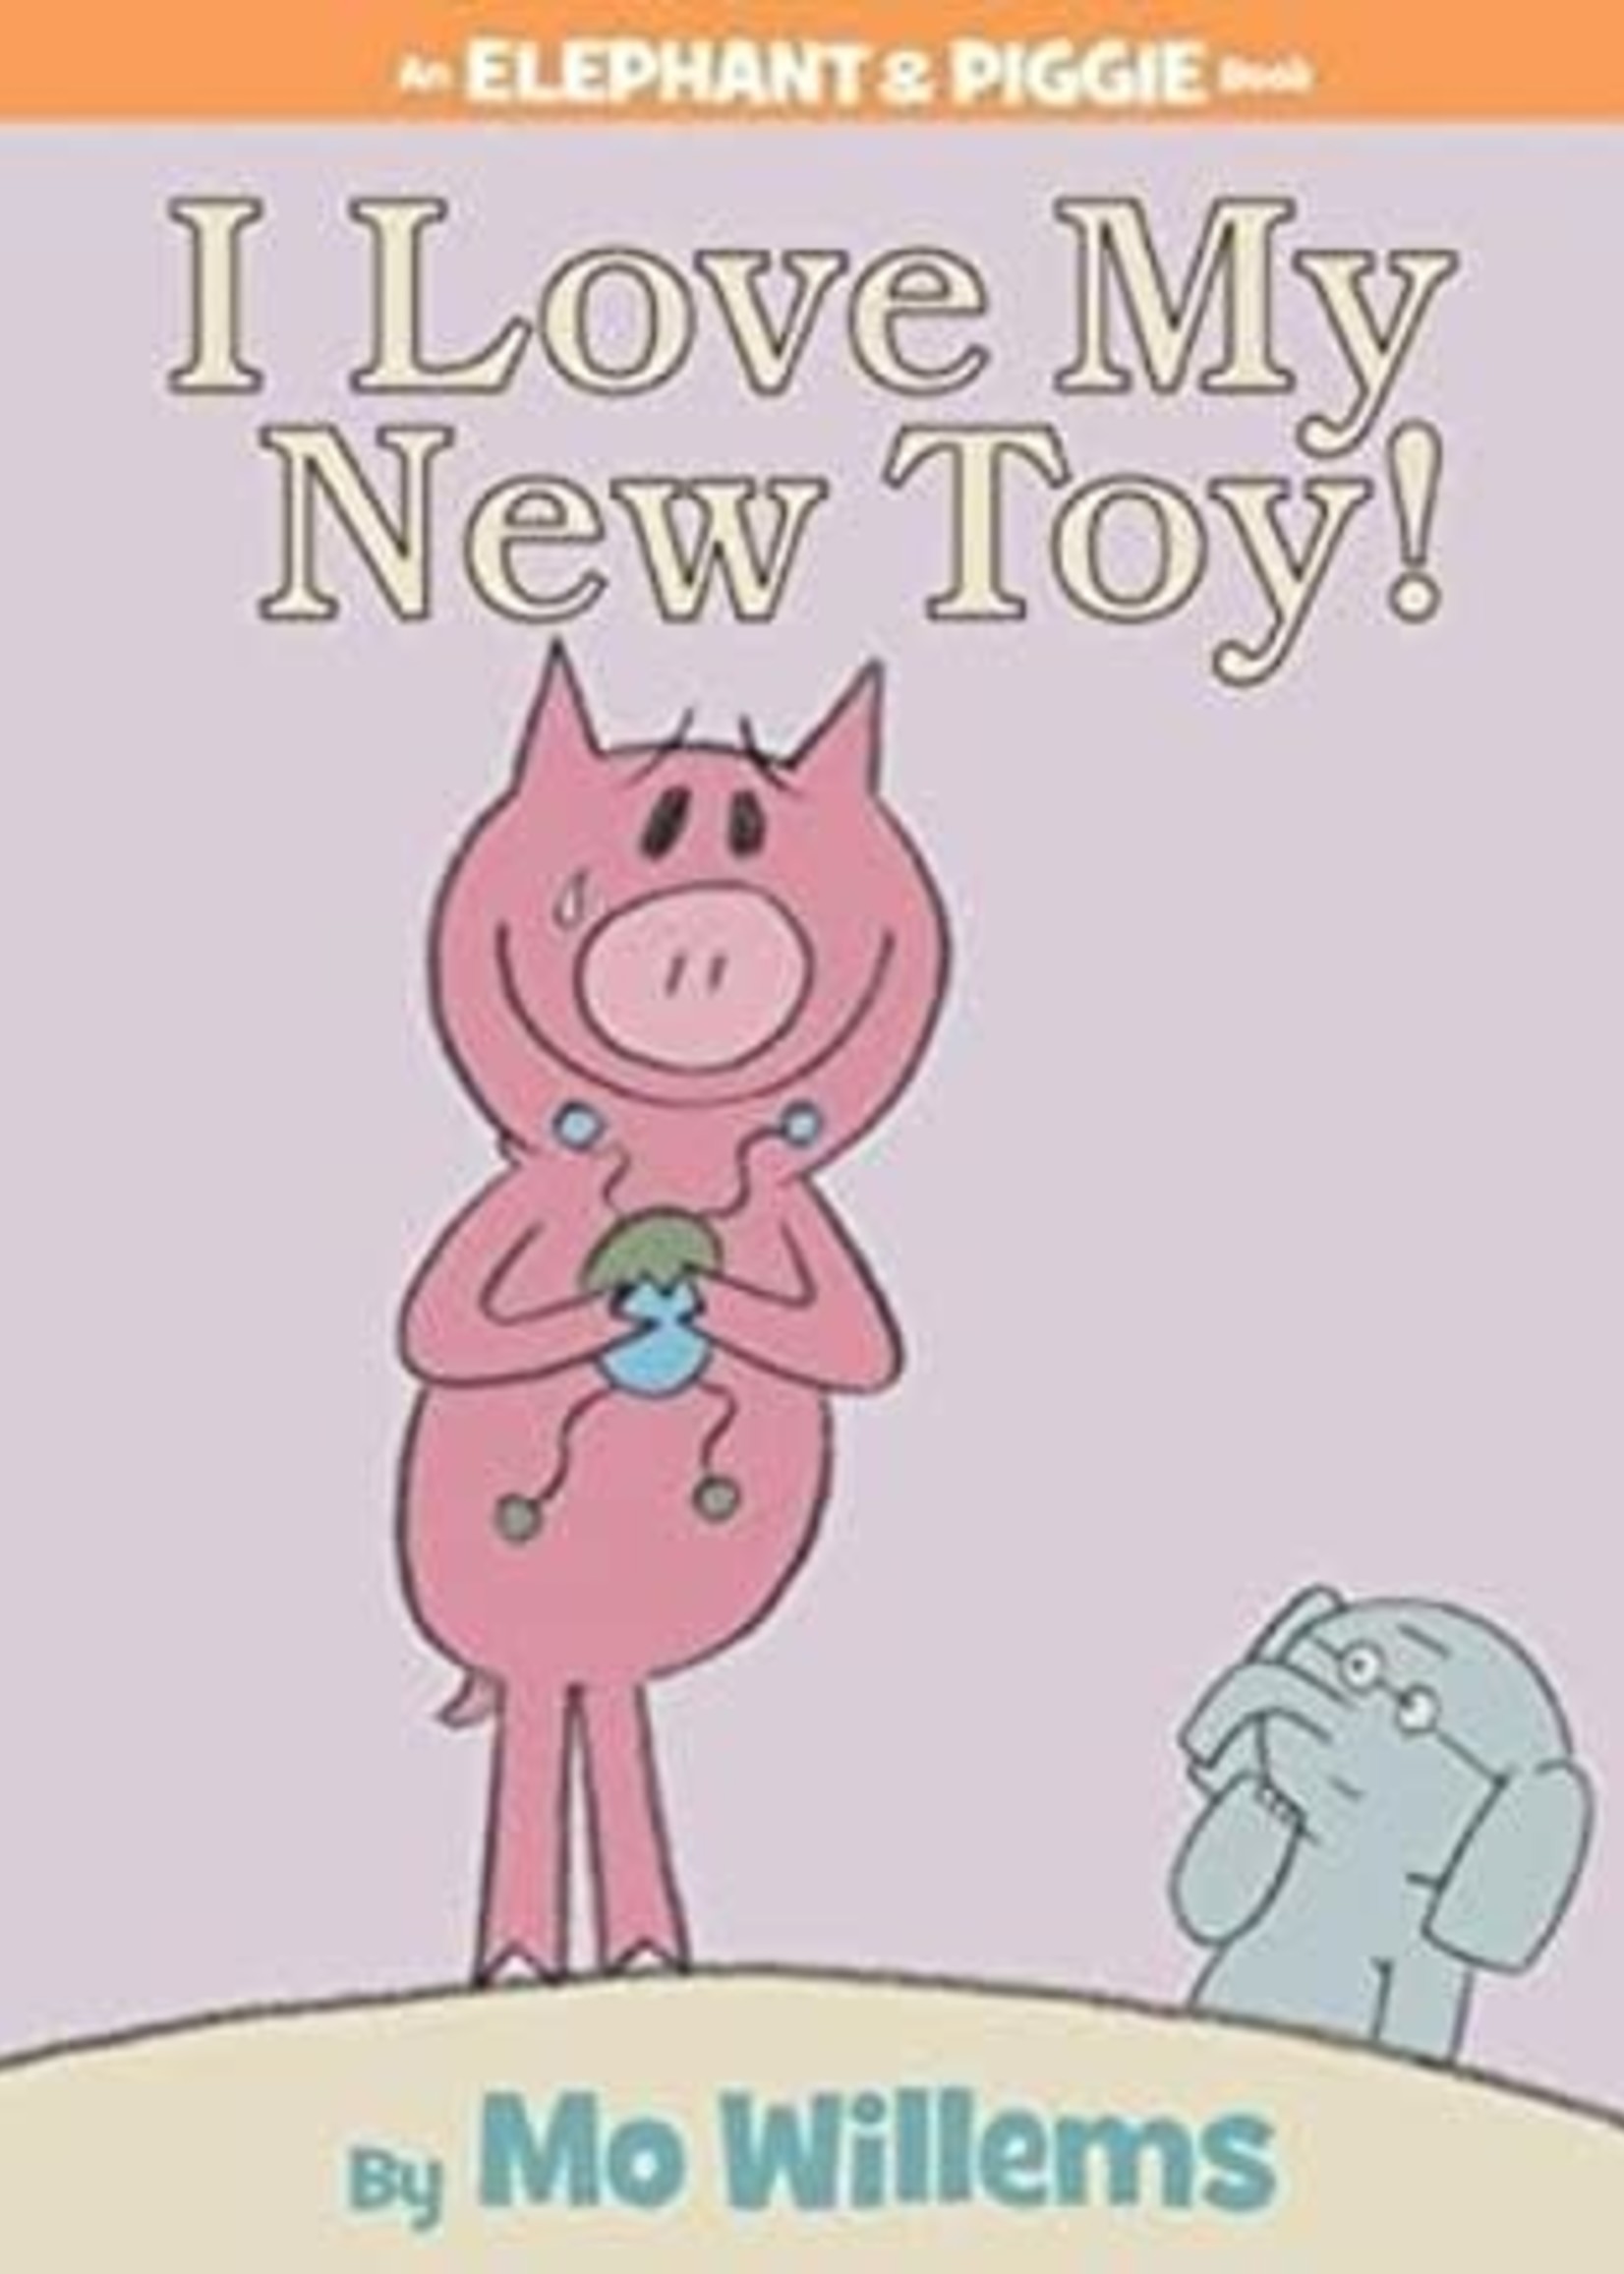 I Love My New Toy! by Mo Willems